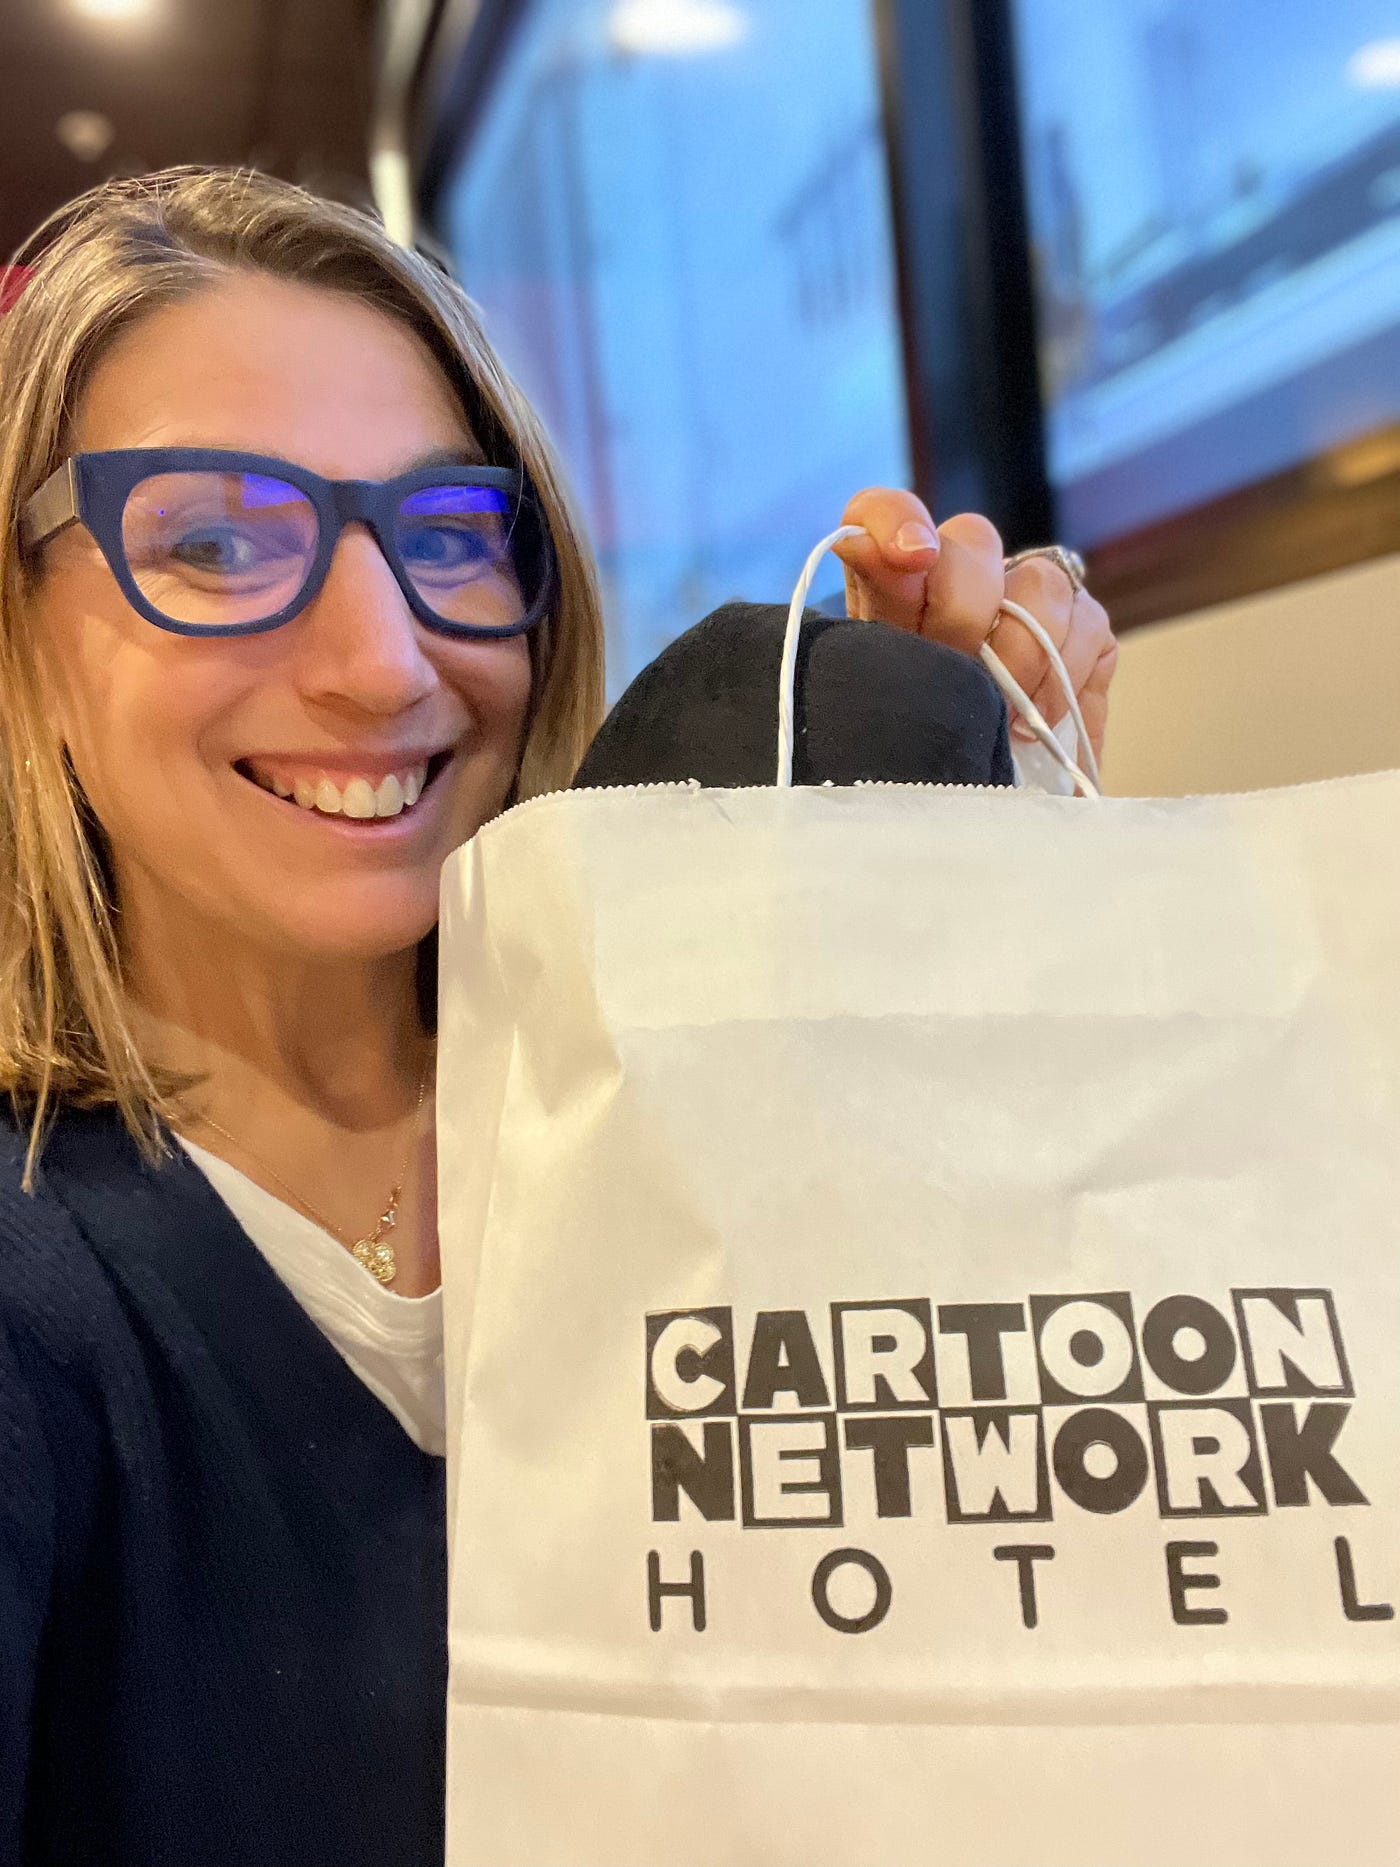 9 Must-Know Tips for Visiting Cartoon Network Hotel - The Mom of